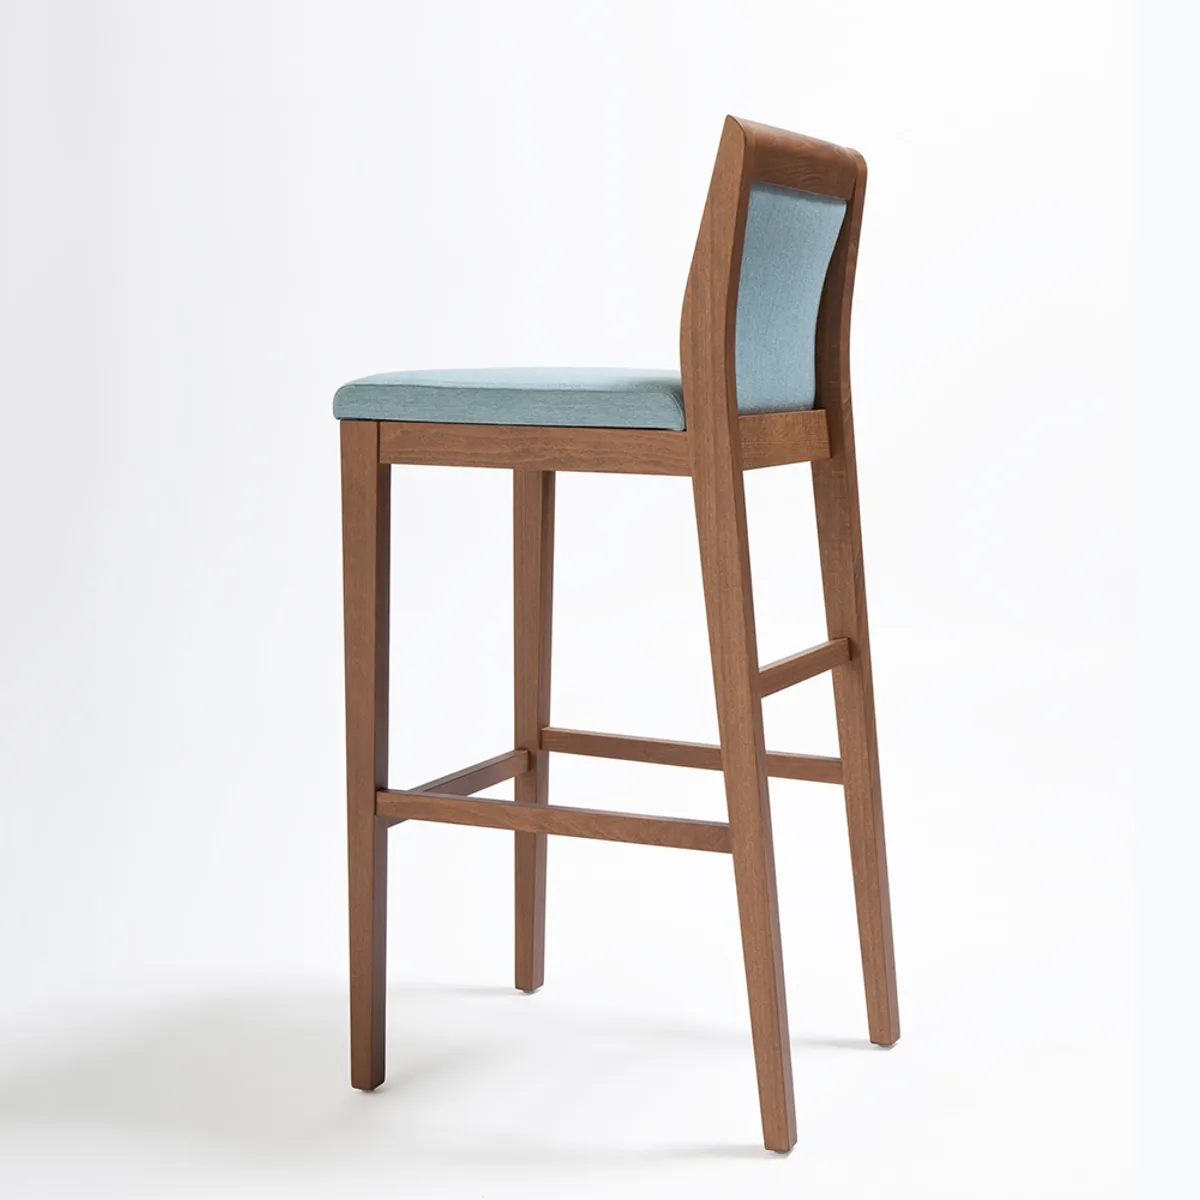 Monte Carlo 7412 Stool Inside Out Contracts